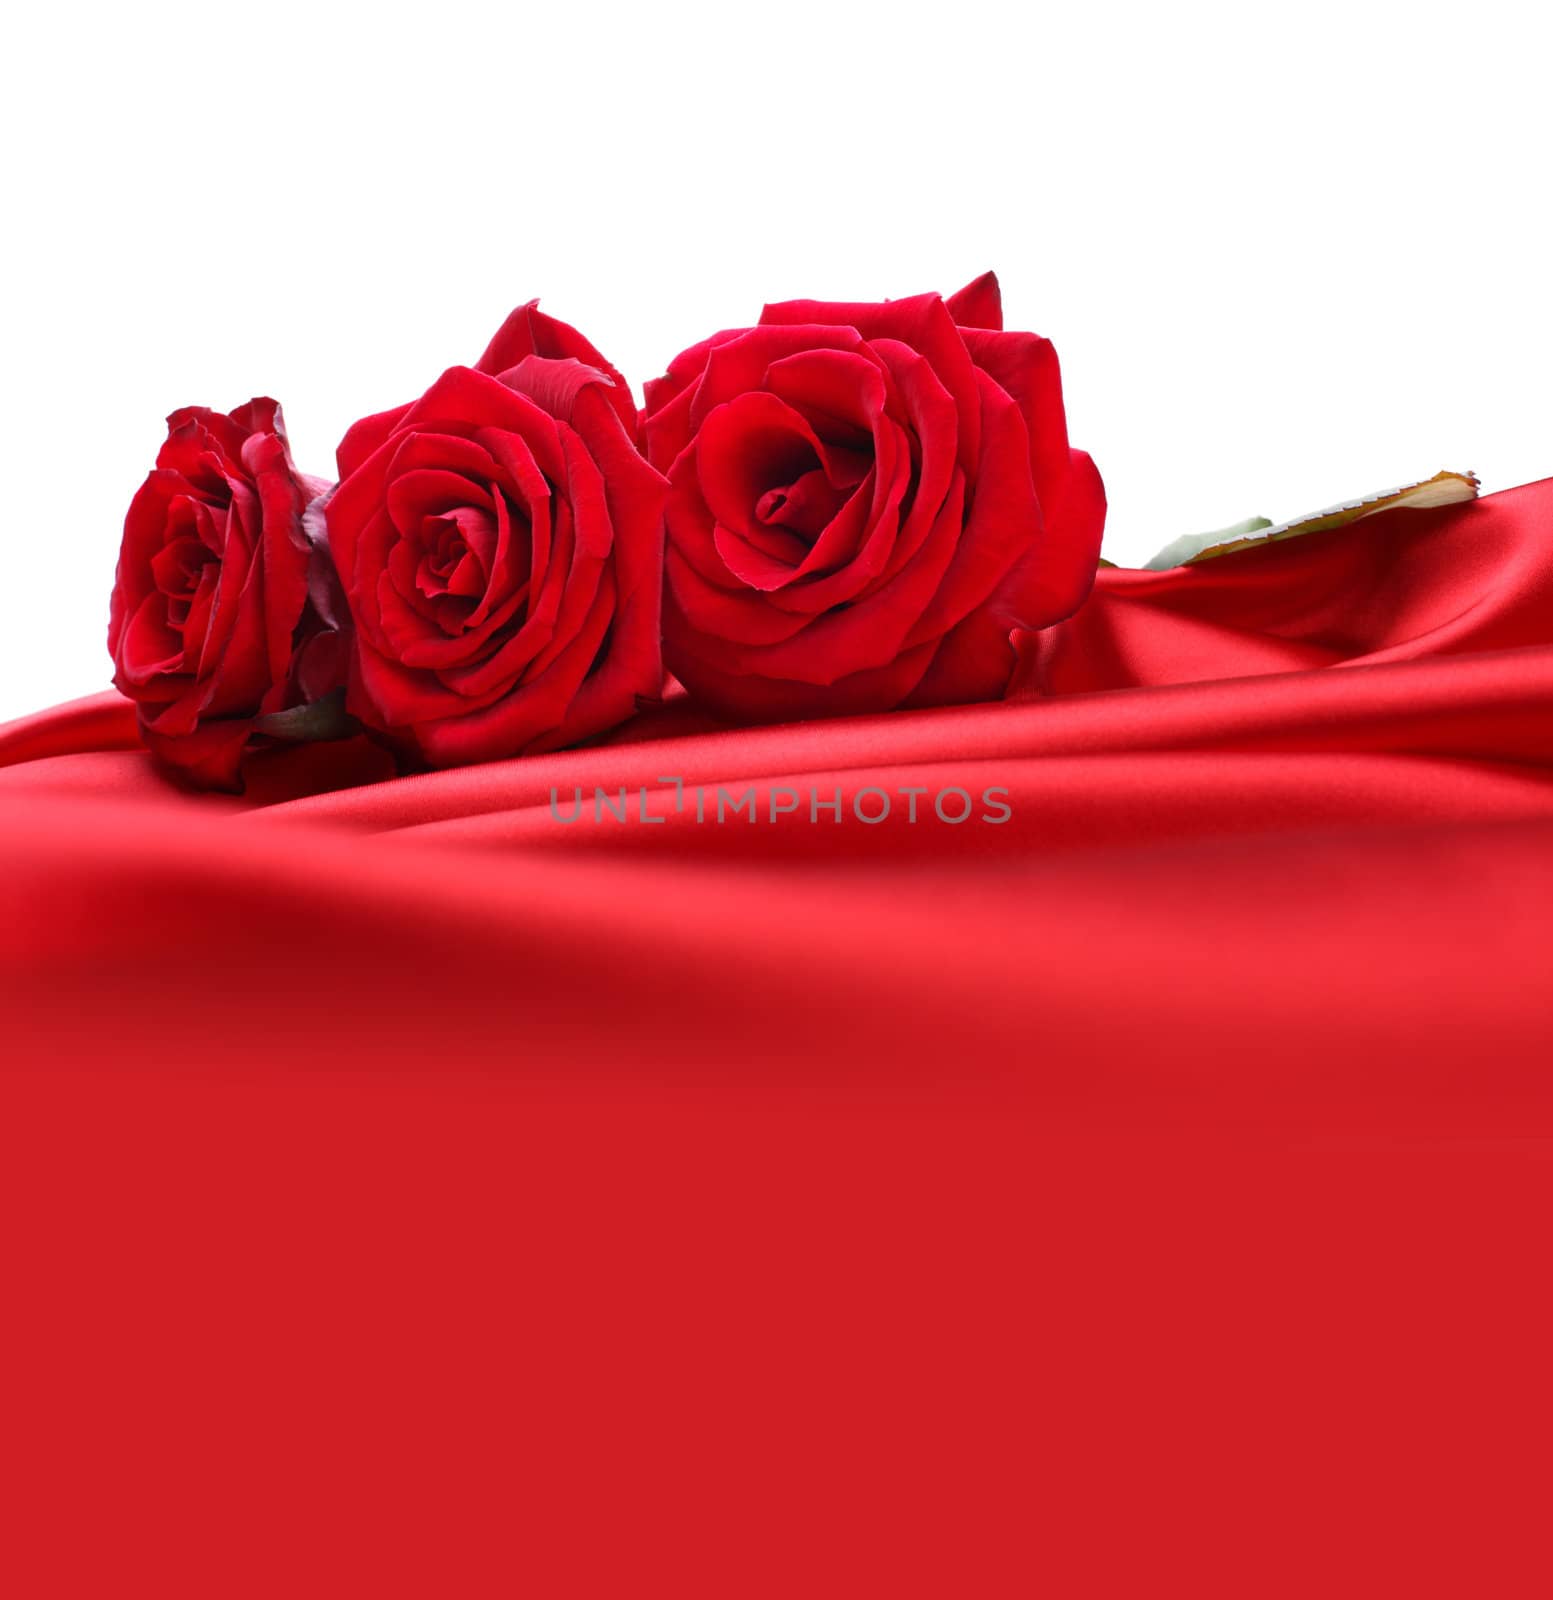 roses on red silk by rudchenko